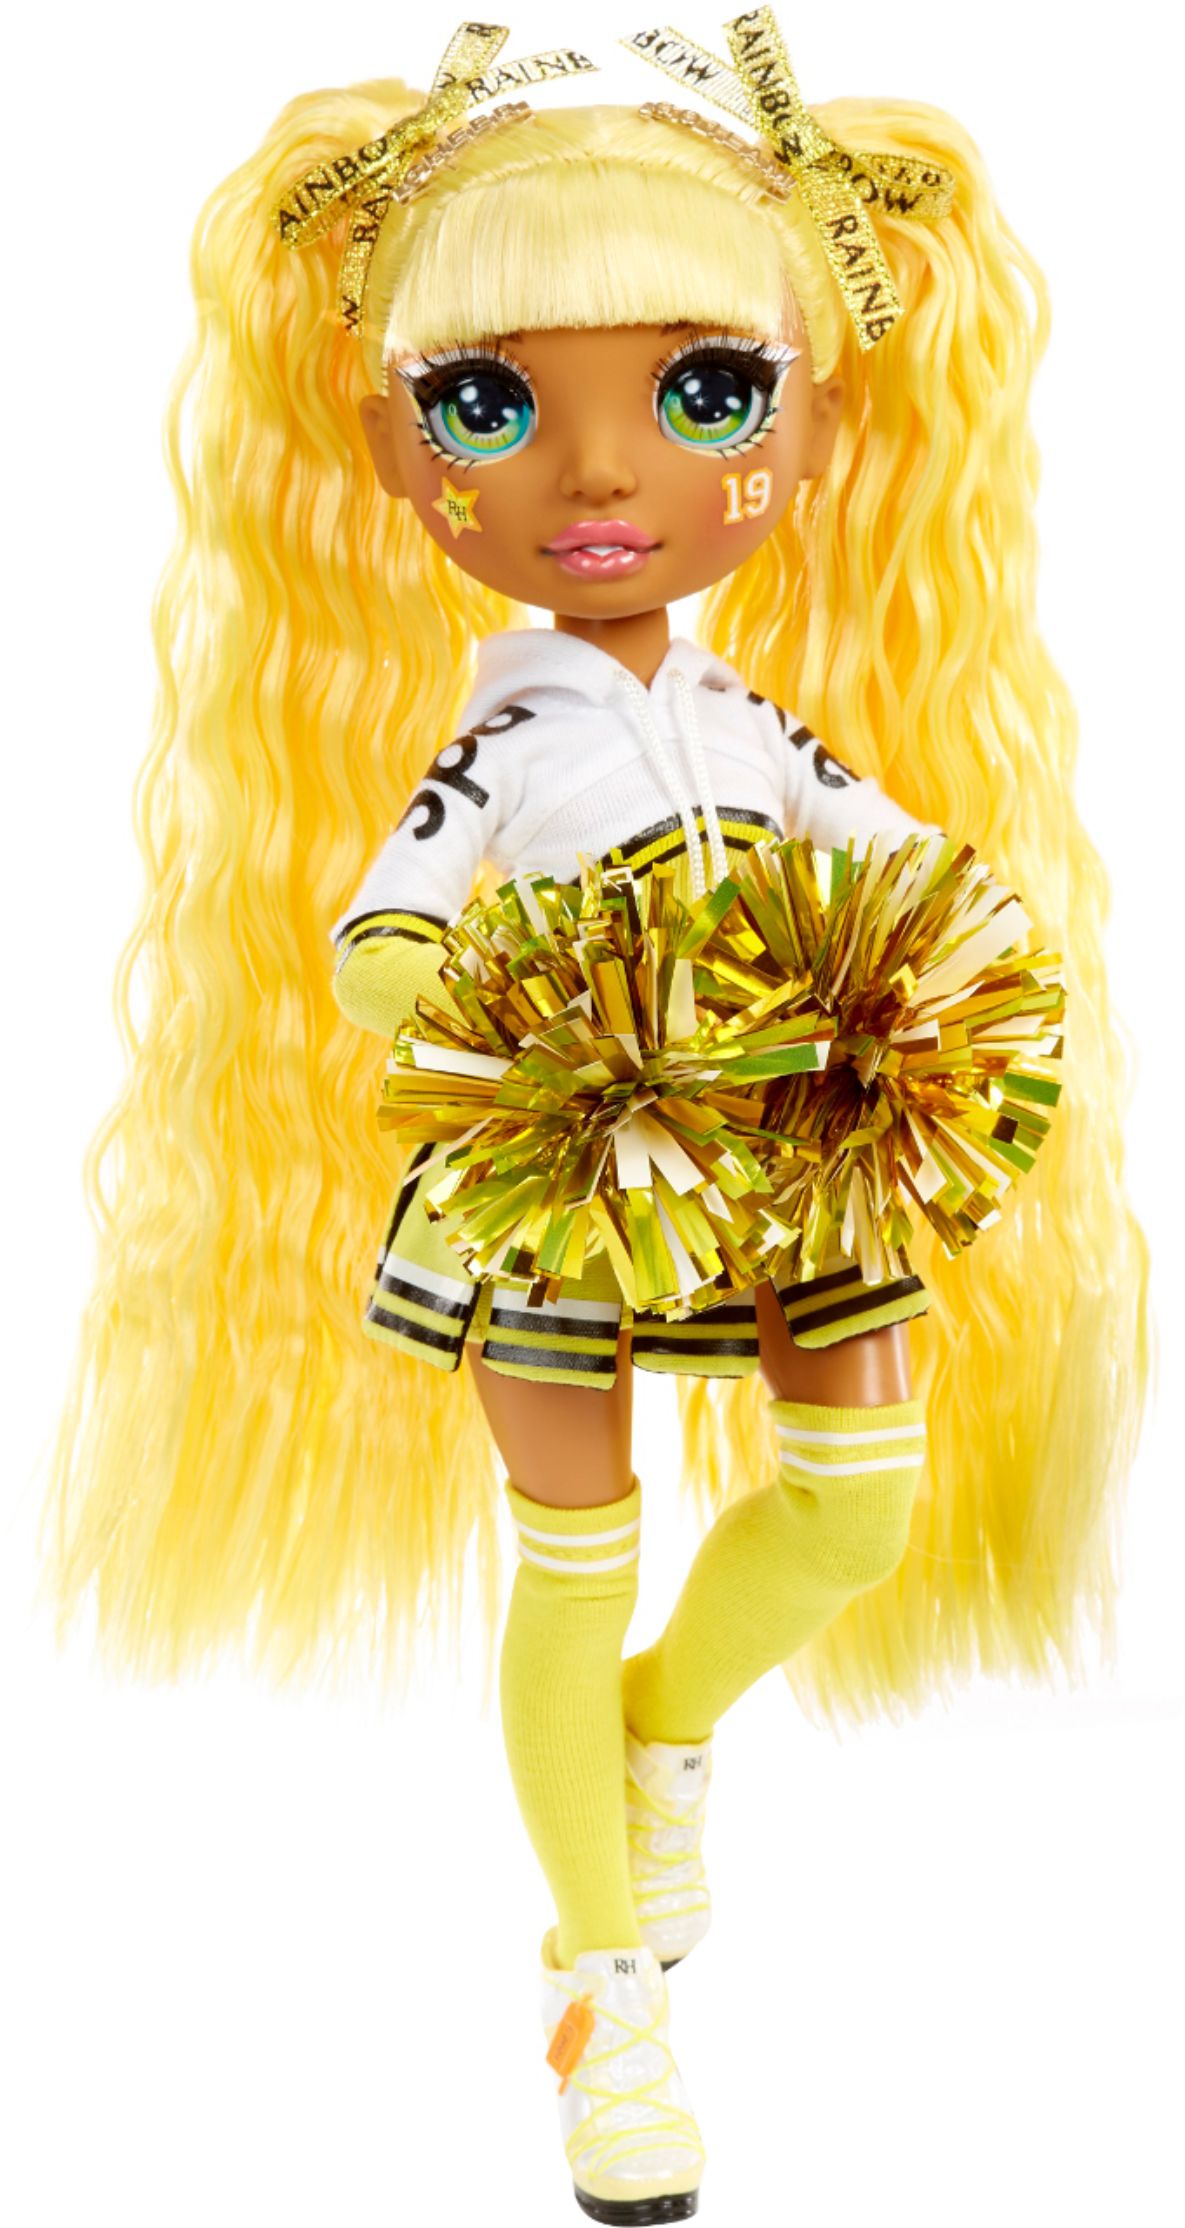 Great Gift for Kids 6-12 Years Old Rainbow High Cheer Poppy Rowan Orange Cheerleader Fashion Doll with 2 Pom Poms and Doll Accessories 